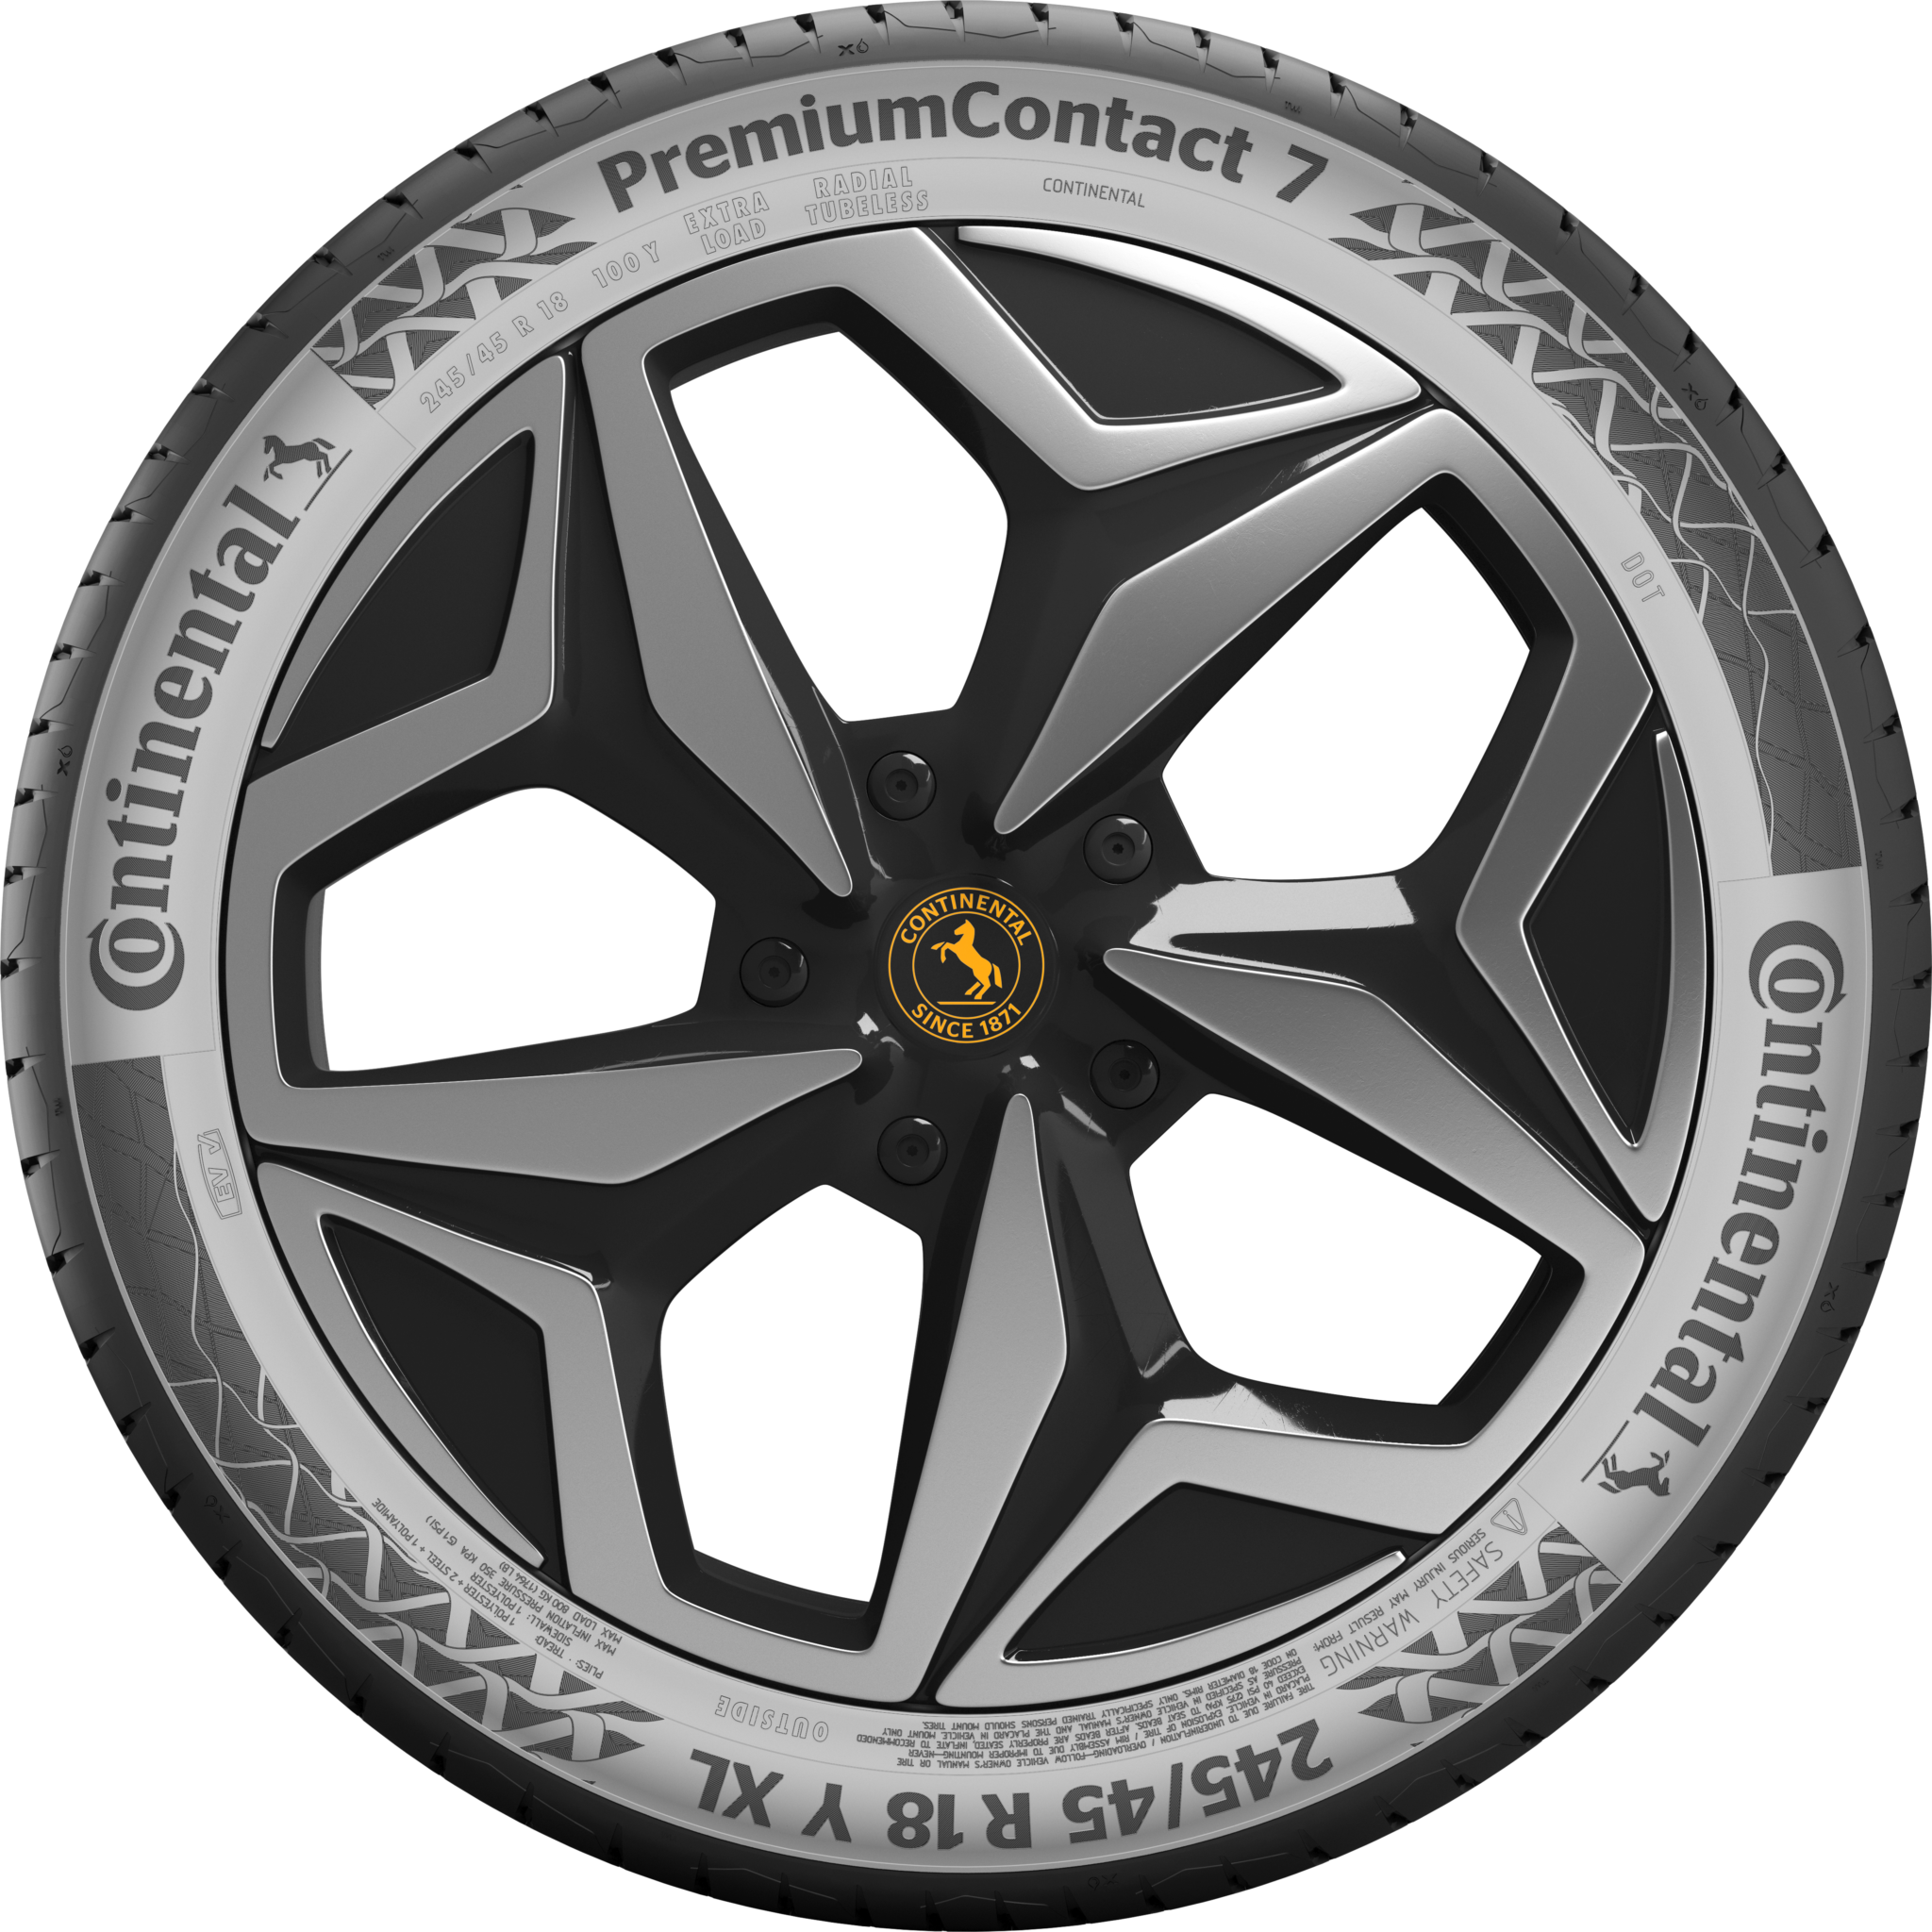 Continental confirms PremiumContact 7 will hit UK market in autumn 2022